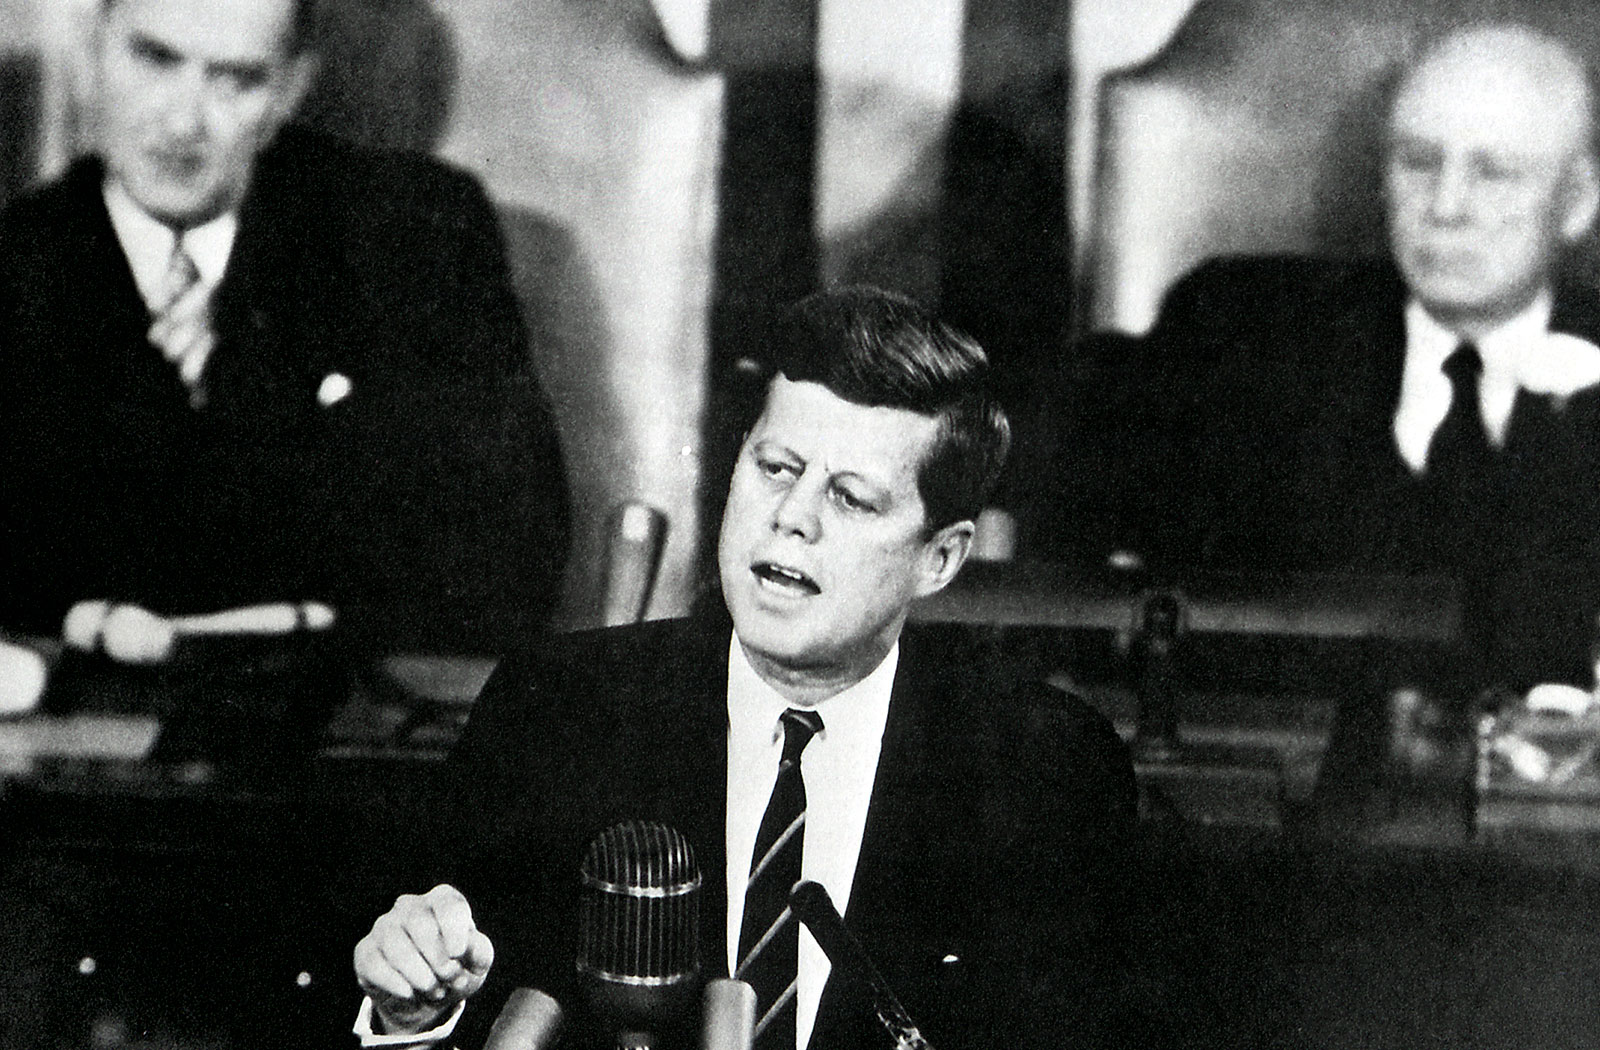 President Kennedy addressing a joint session of Congress